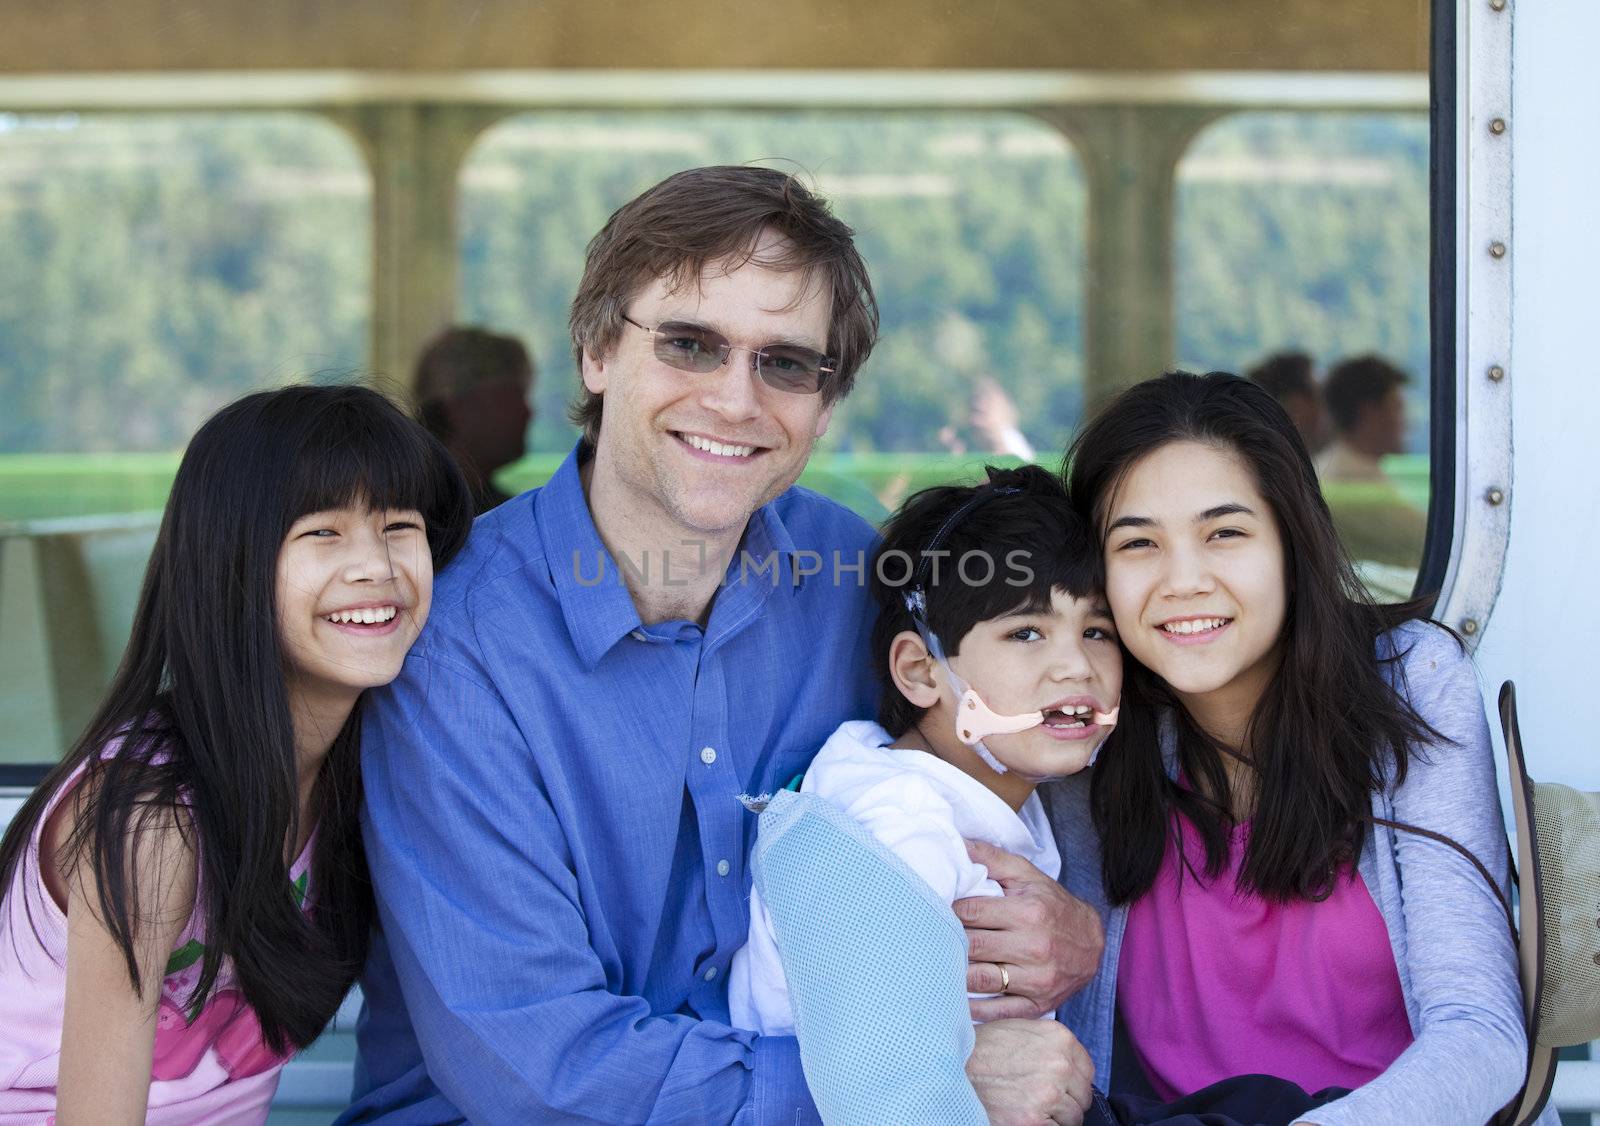 Father with his biracial children, holding disabled son on ferry boat deck. Boy has cerebral palsy